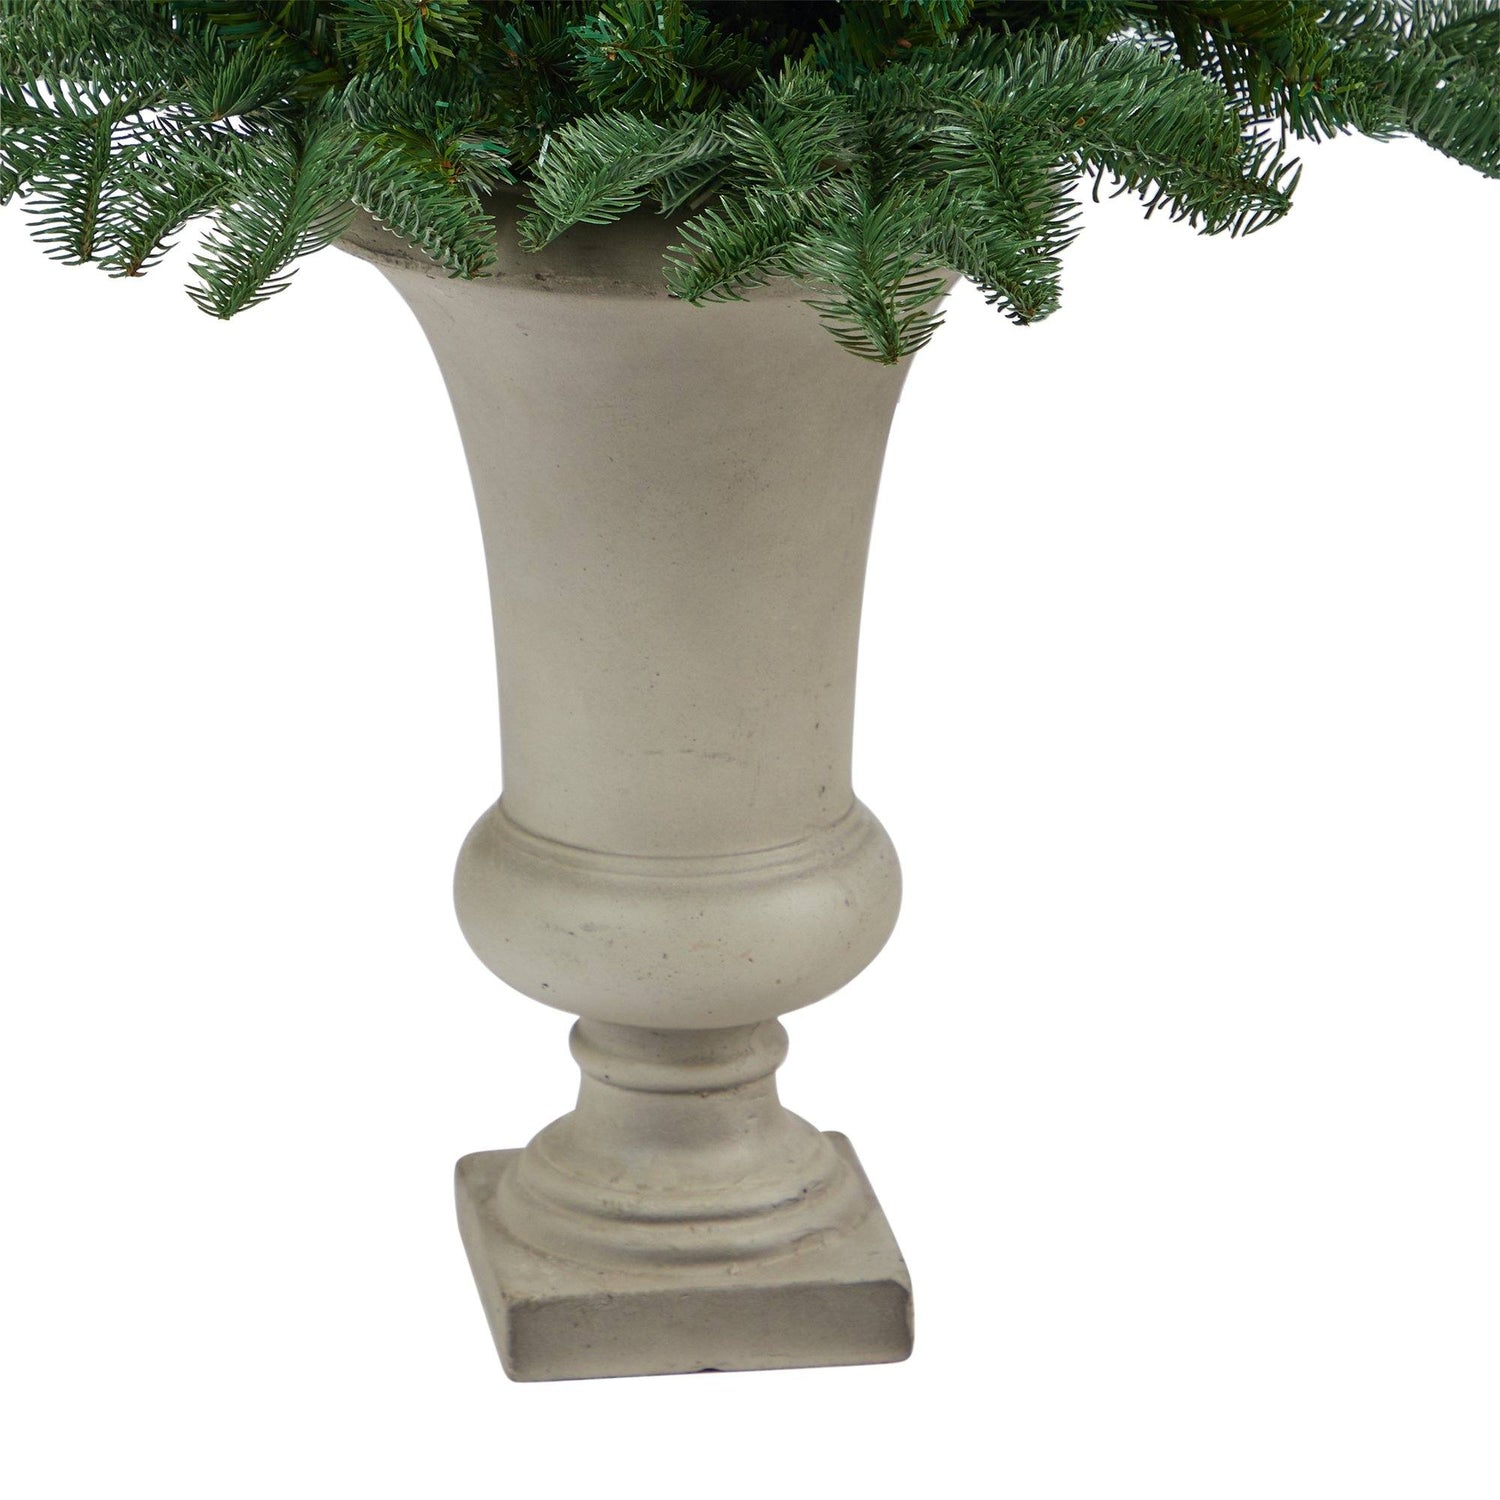 3.5’ South Carolina Spruce Artificial Christmas Tree with 458 Bendable Branches in Sand Colored Urn